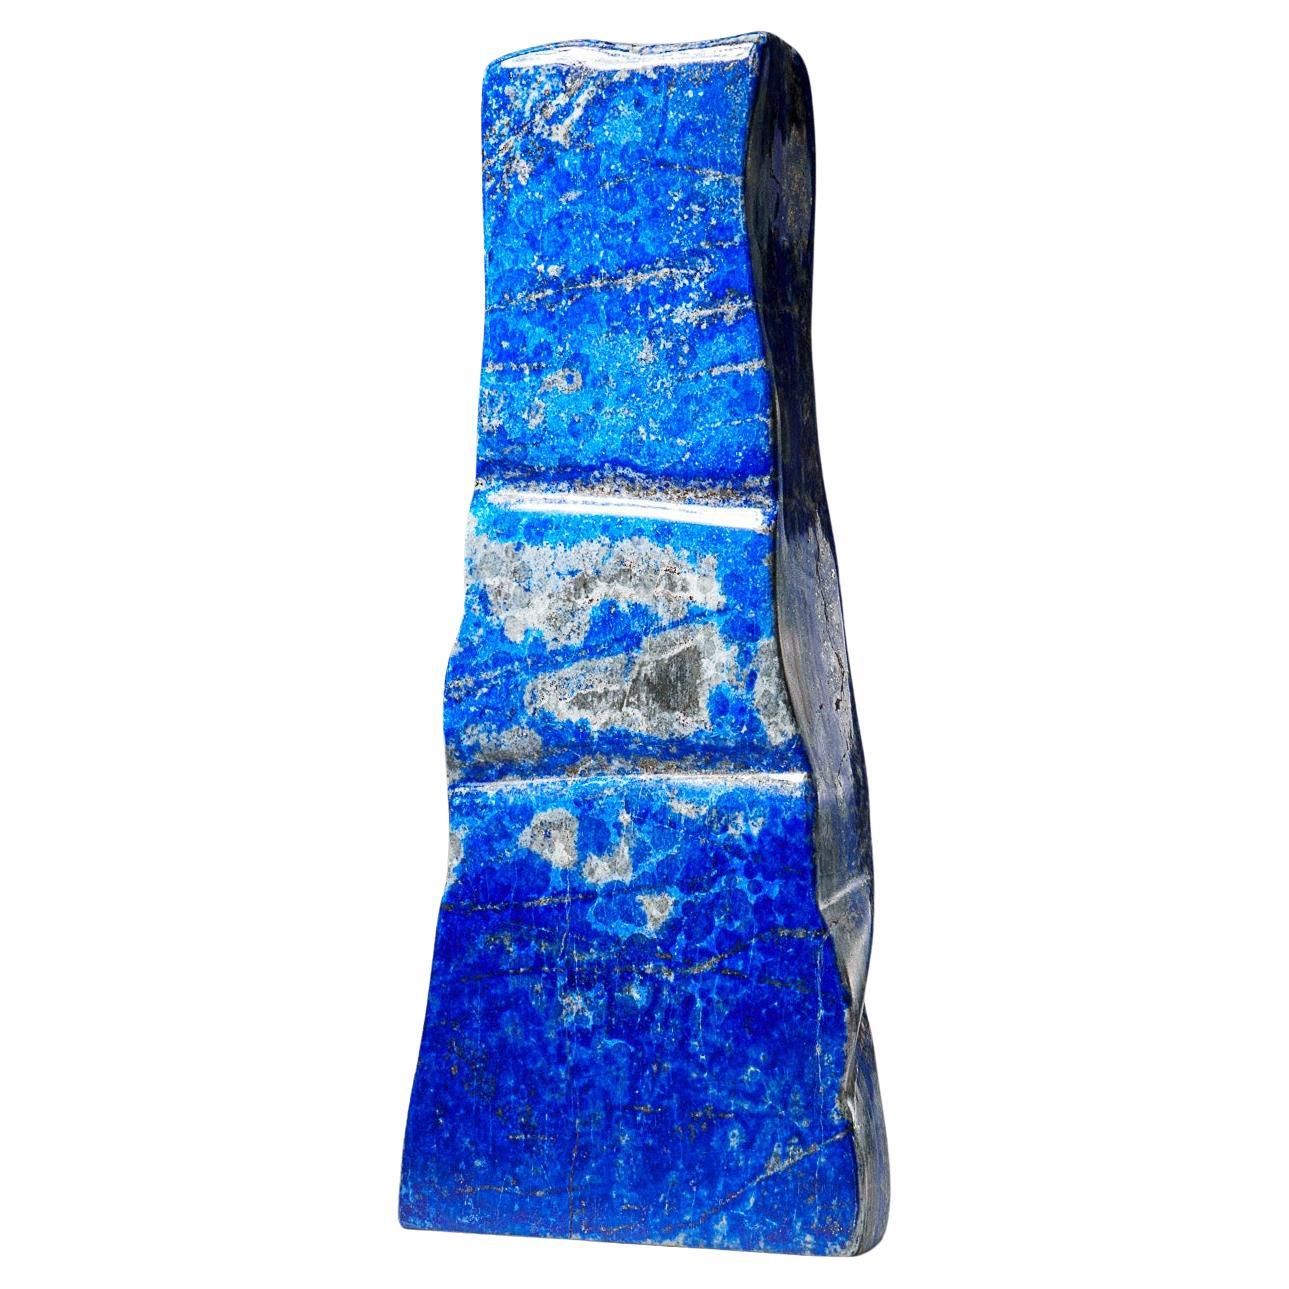 Beautiful hand polished freeform of AAA quality natural Afghani lapis lazuli. This specimen has rich, electric-royal blue color enriched with scintillating pyrite micro-crystals.

Lapis Lazuli is a powerful crystal for activating the higher mind